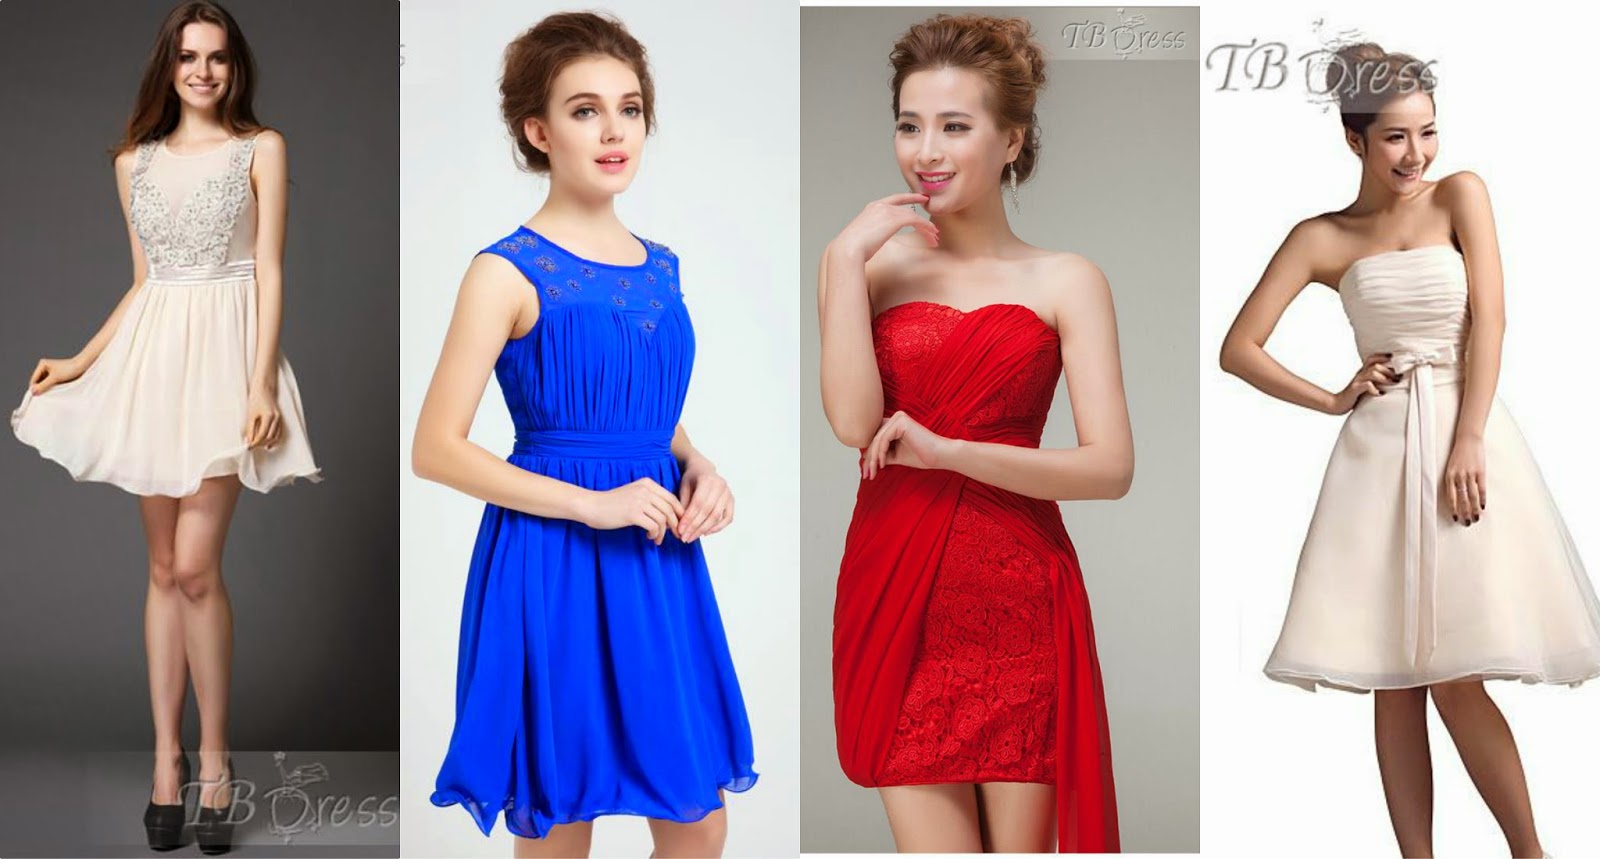 Bridesmaid Dresses from TBDress